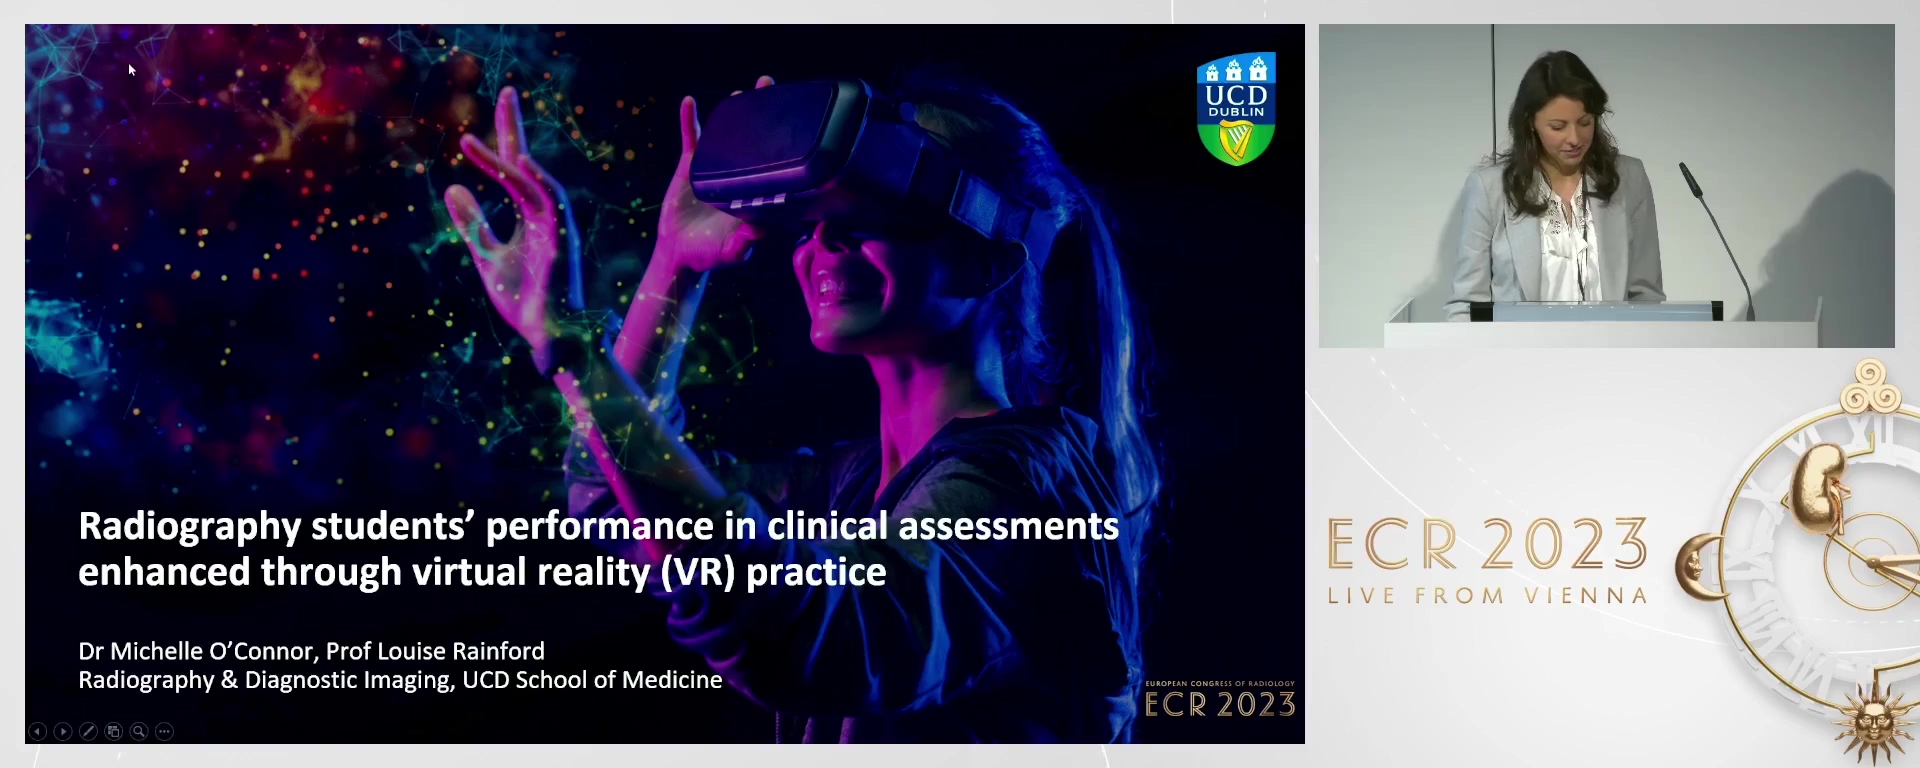 Radiography students' performance in clinical assessments enhanced through virtual reality (VR) practice - Michelle O'Connor, Dublin / IE